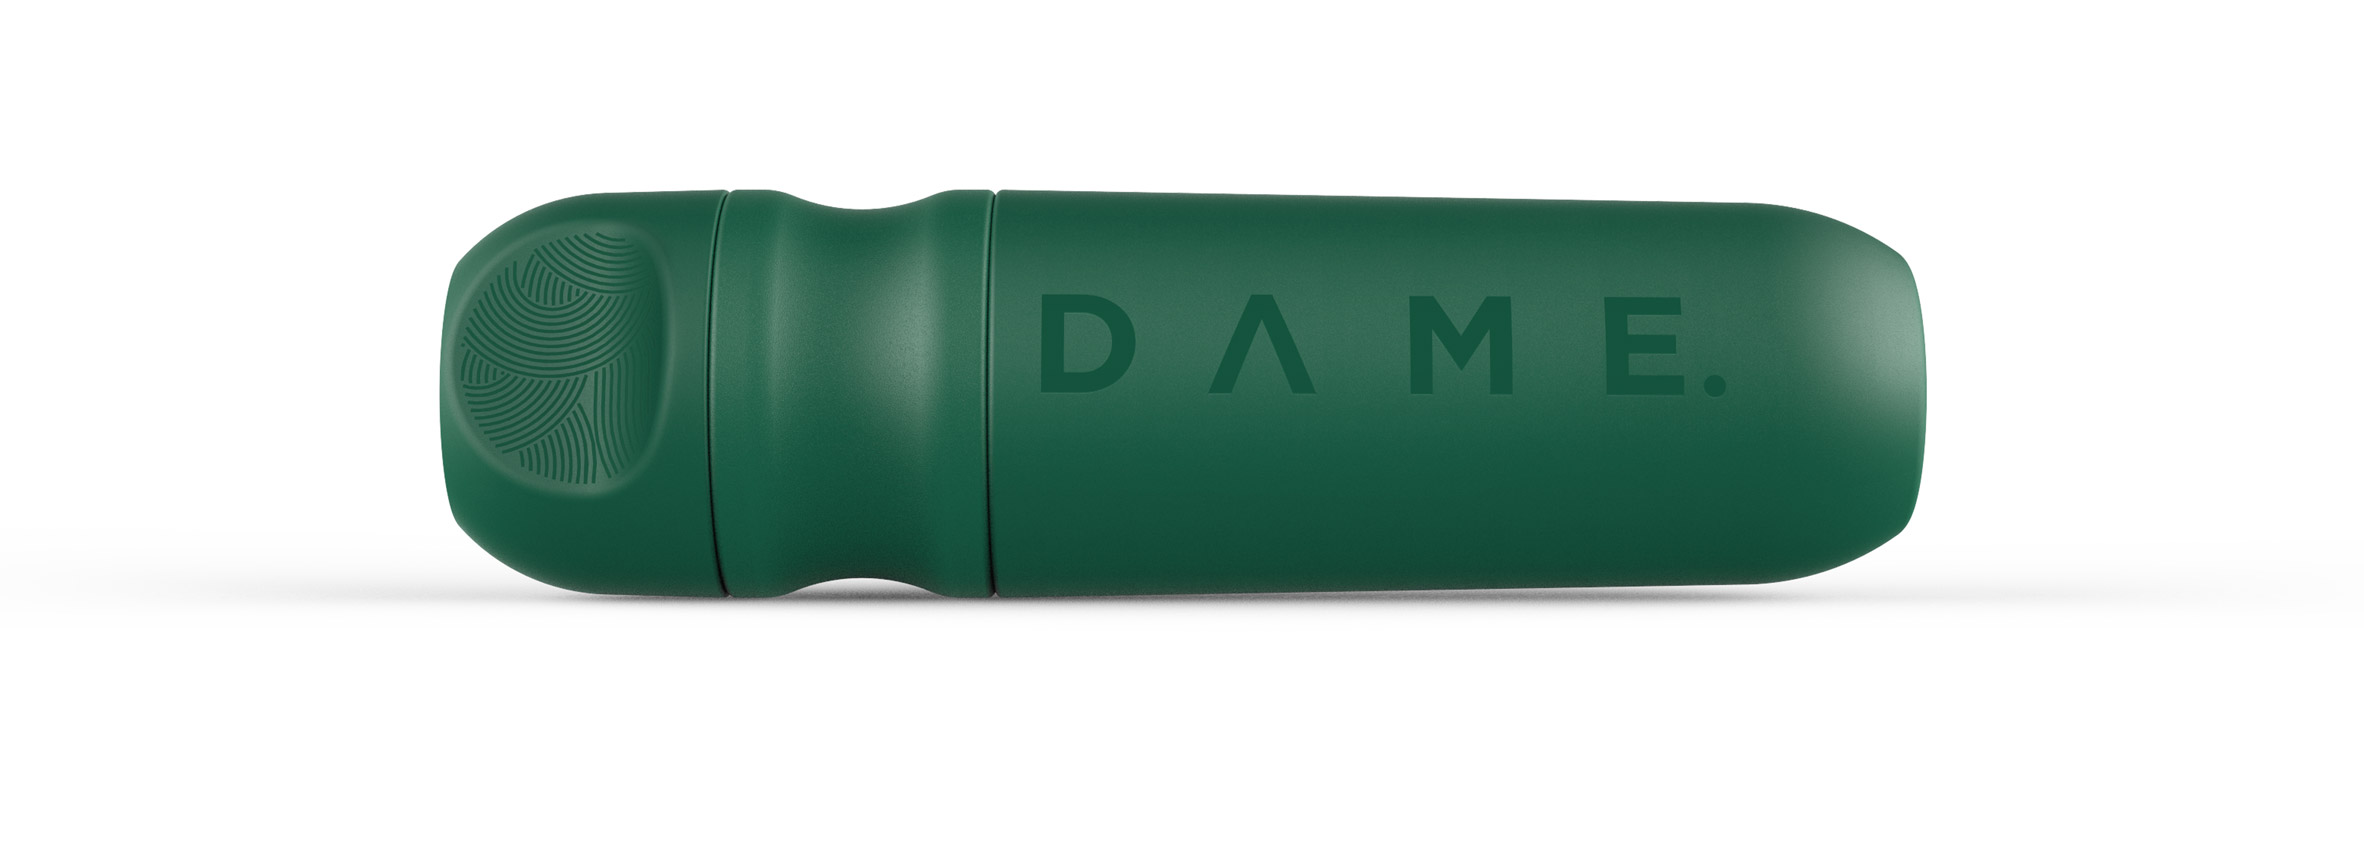 Dame launches reusable tampon applicator as a "period product for the 21st-century"